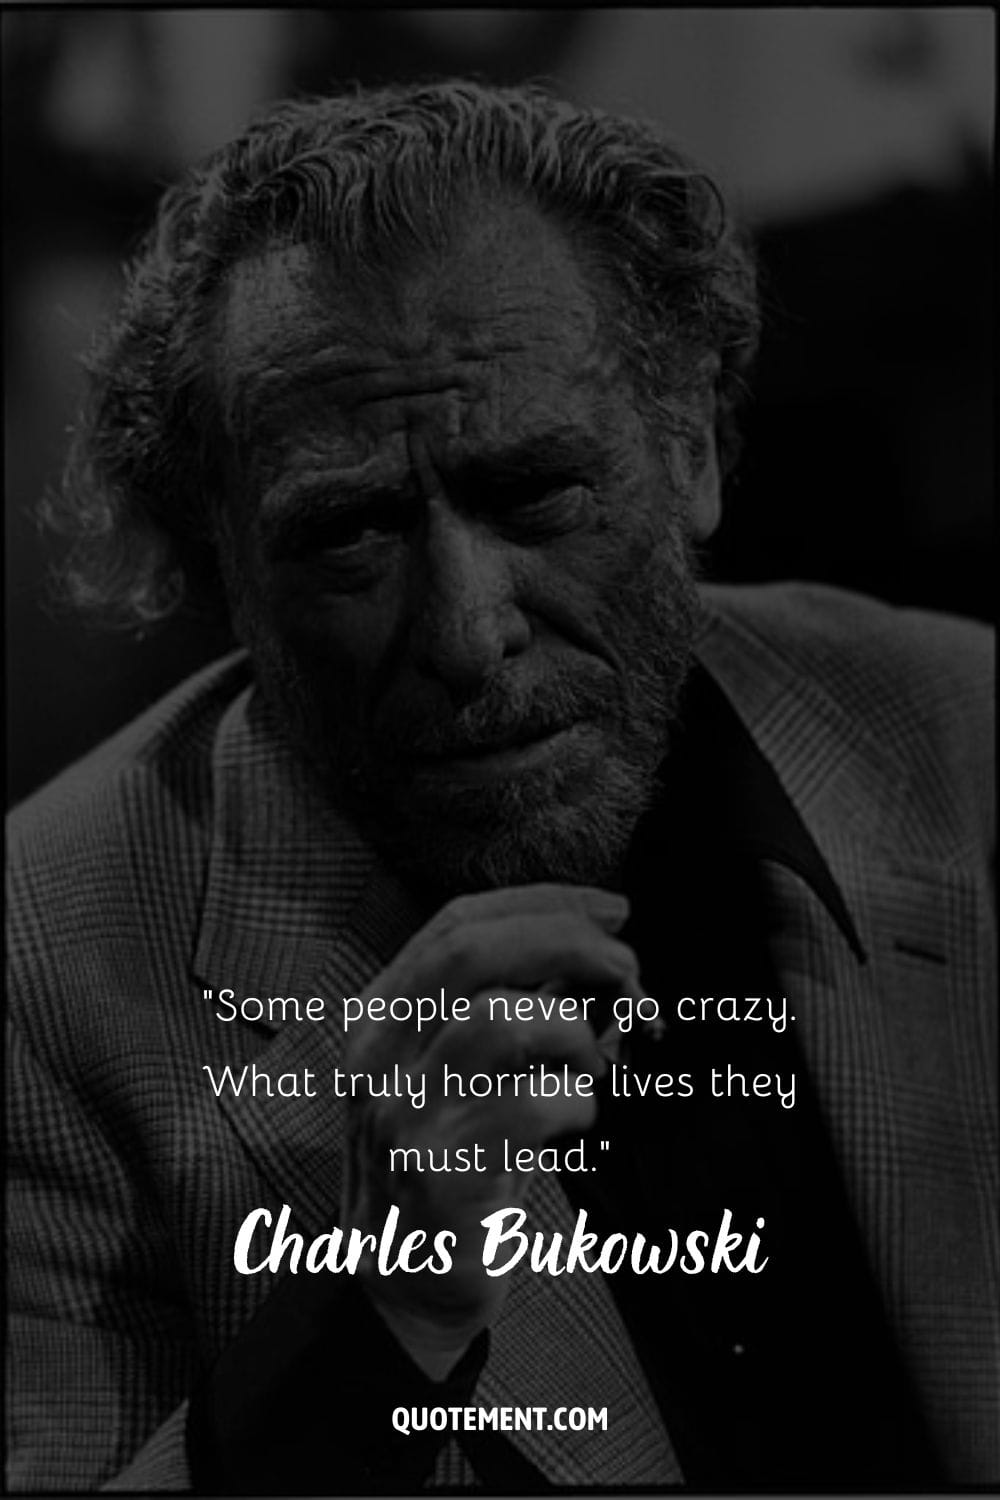 Charles Bukowski in a suit, holding a cigarette